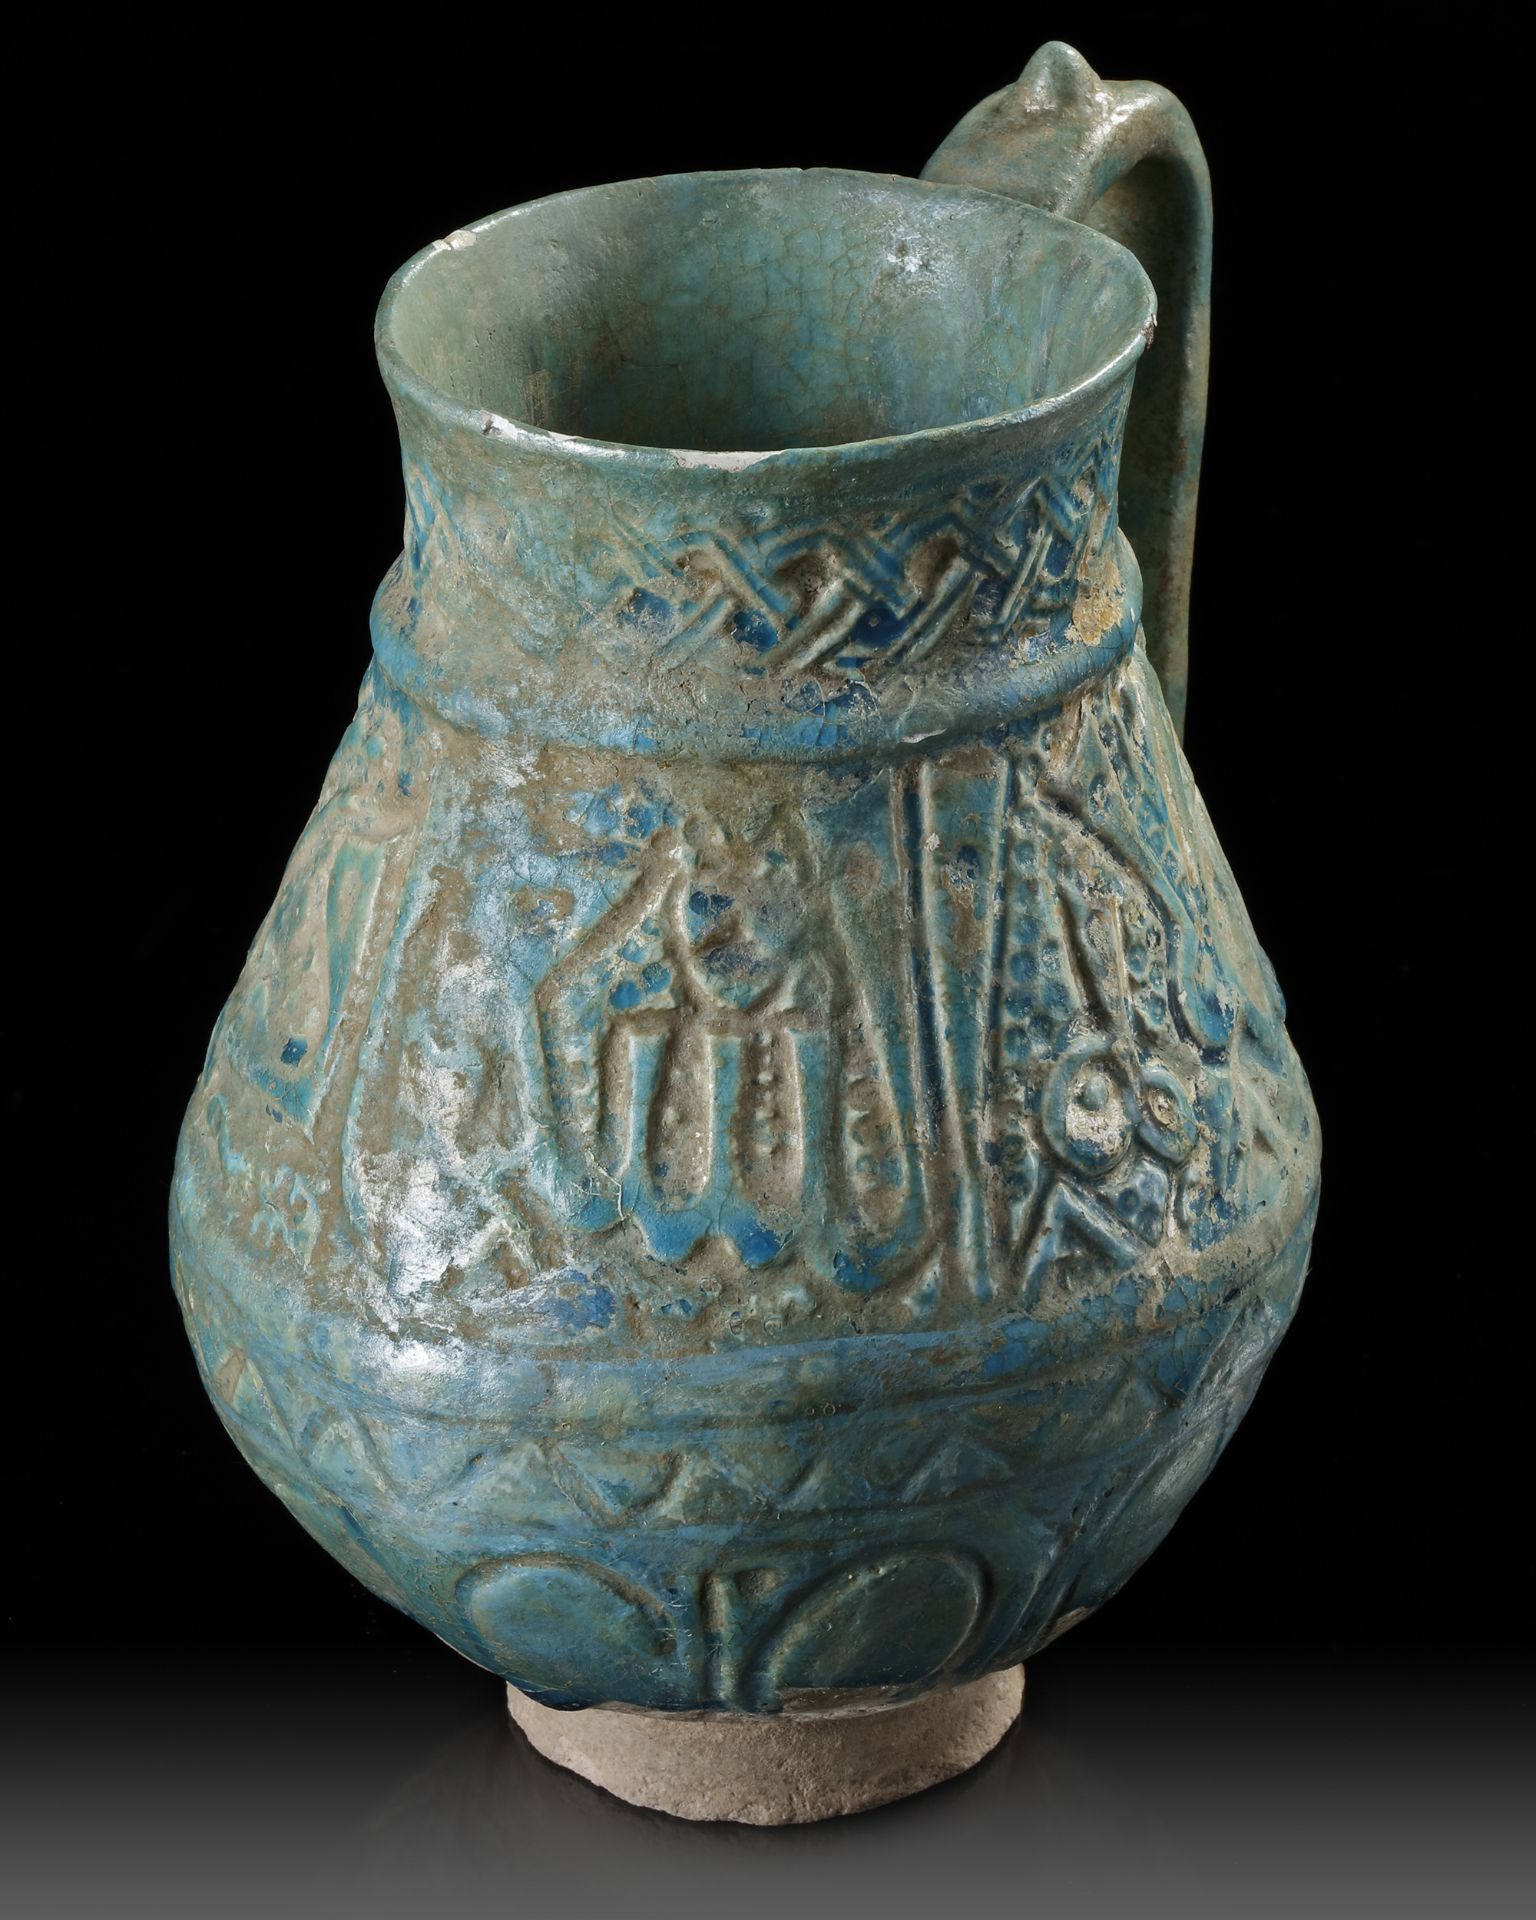 A TURQUOISE GLAZED POTTERY EWER, PROBABLY NISHAPUR, 12TH CENTURY - Image 3 of 8